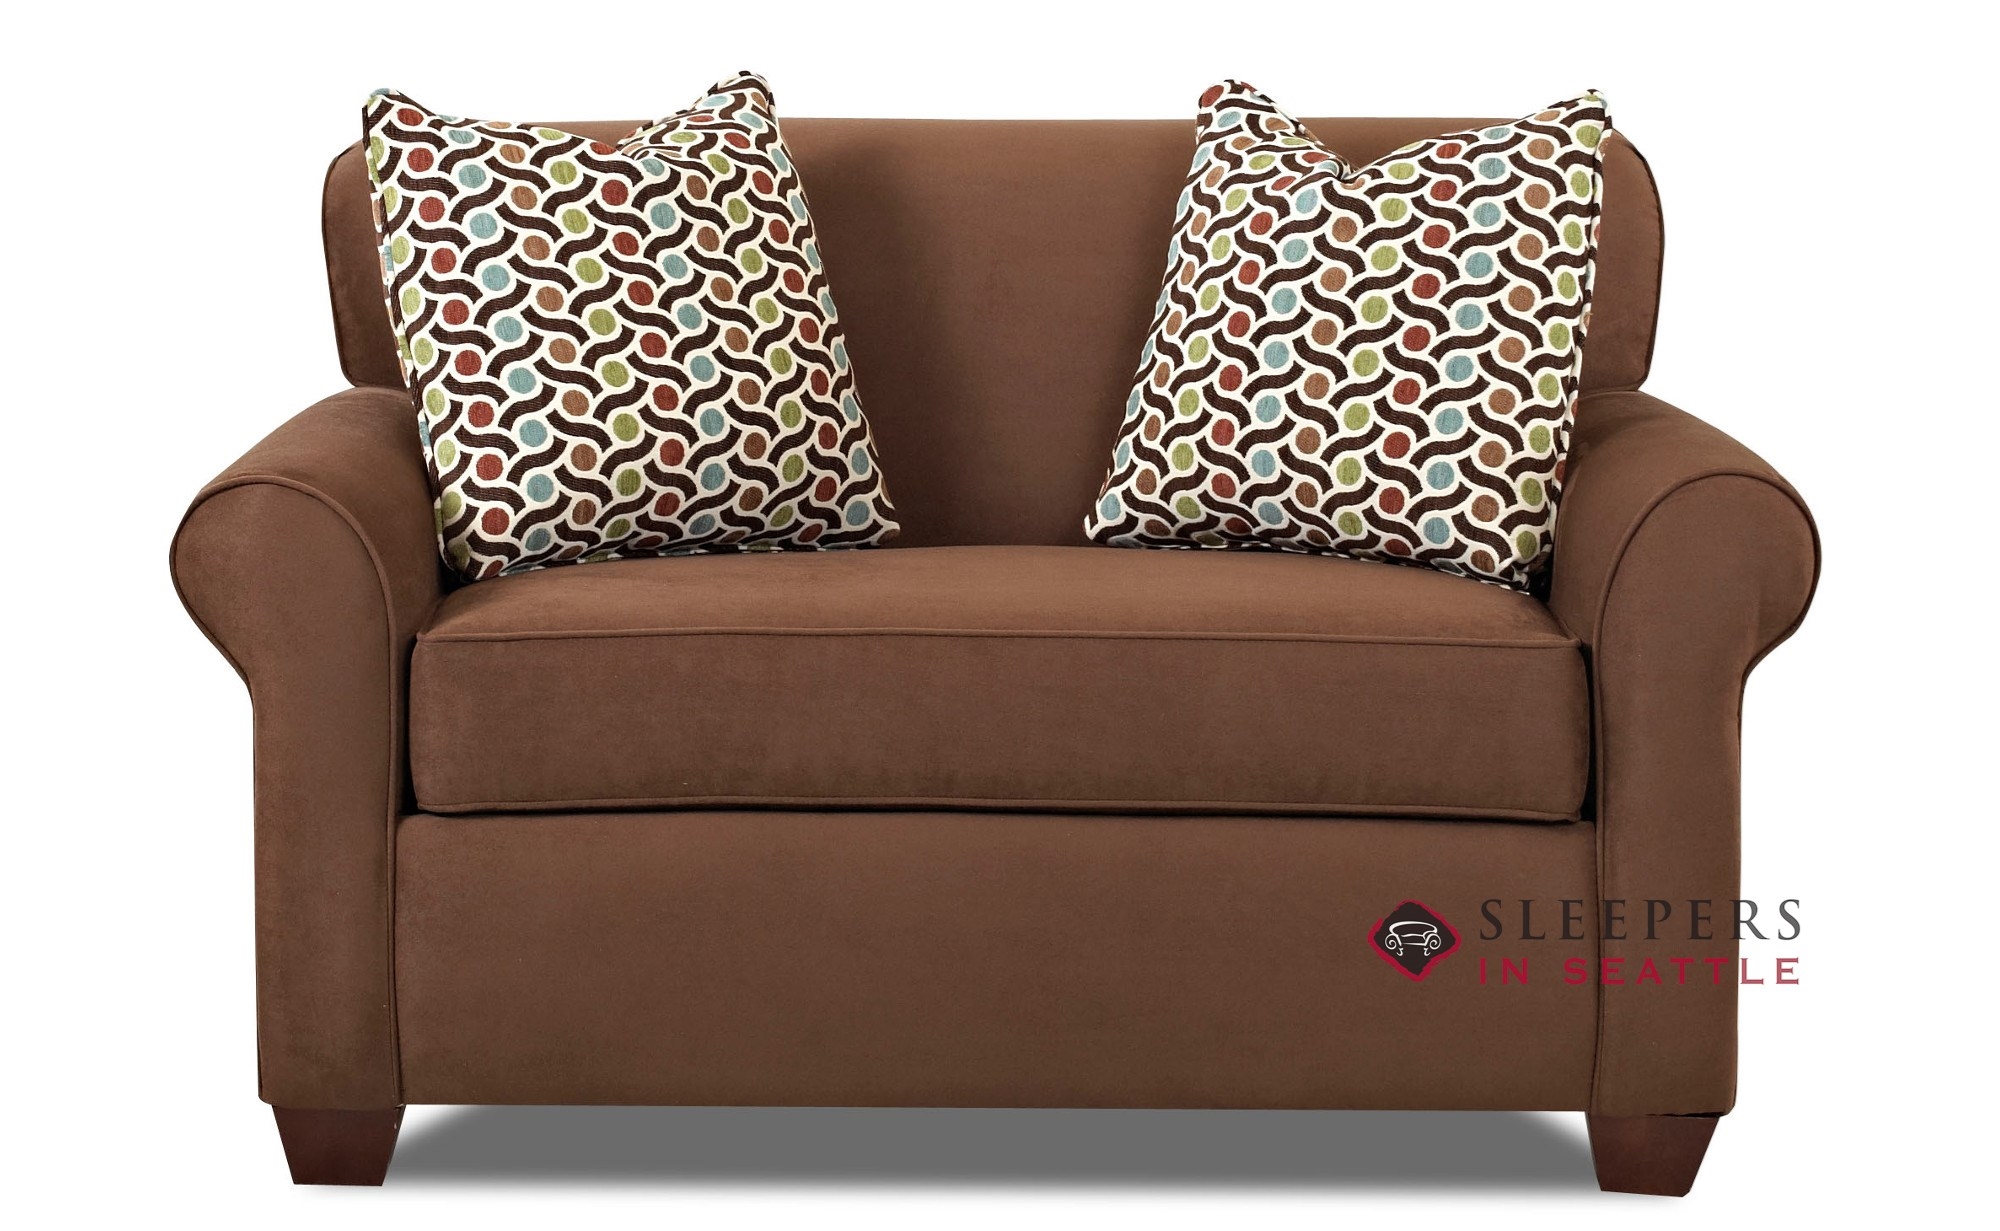 Customize And Personalize Calgary Chair Fabric Sofa By Savvy Size Bed Sleepersinseattle Com